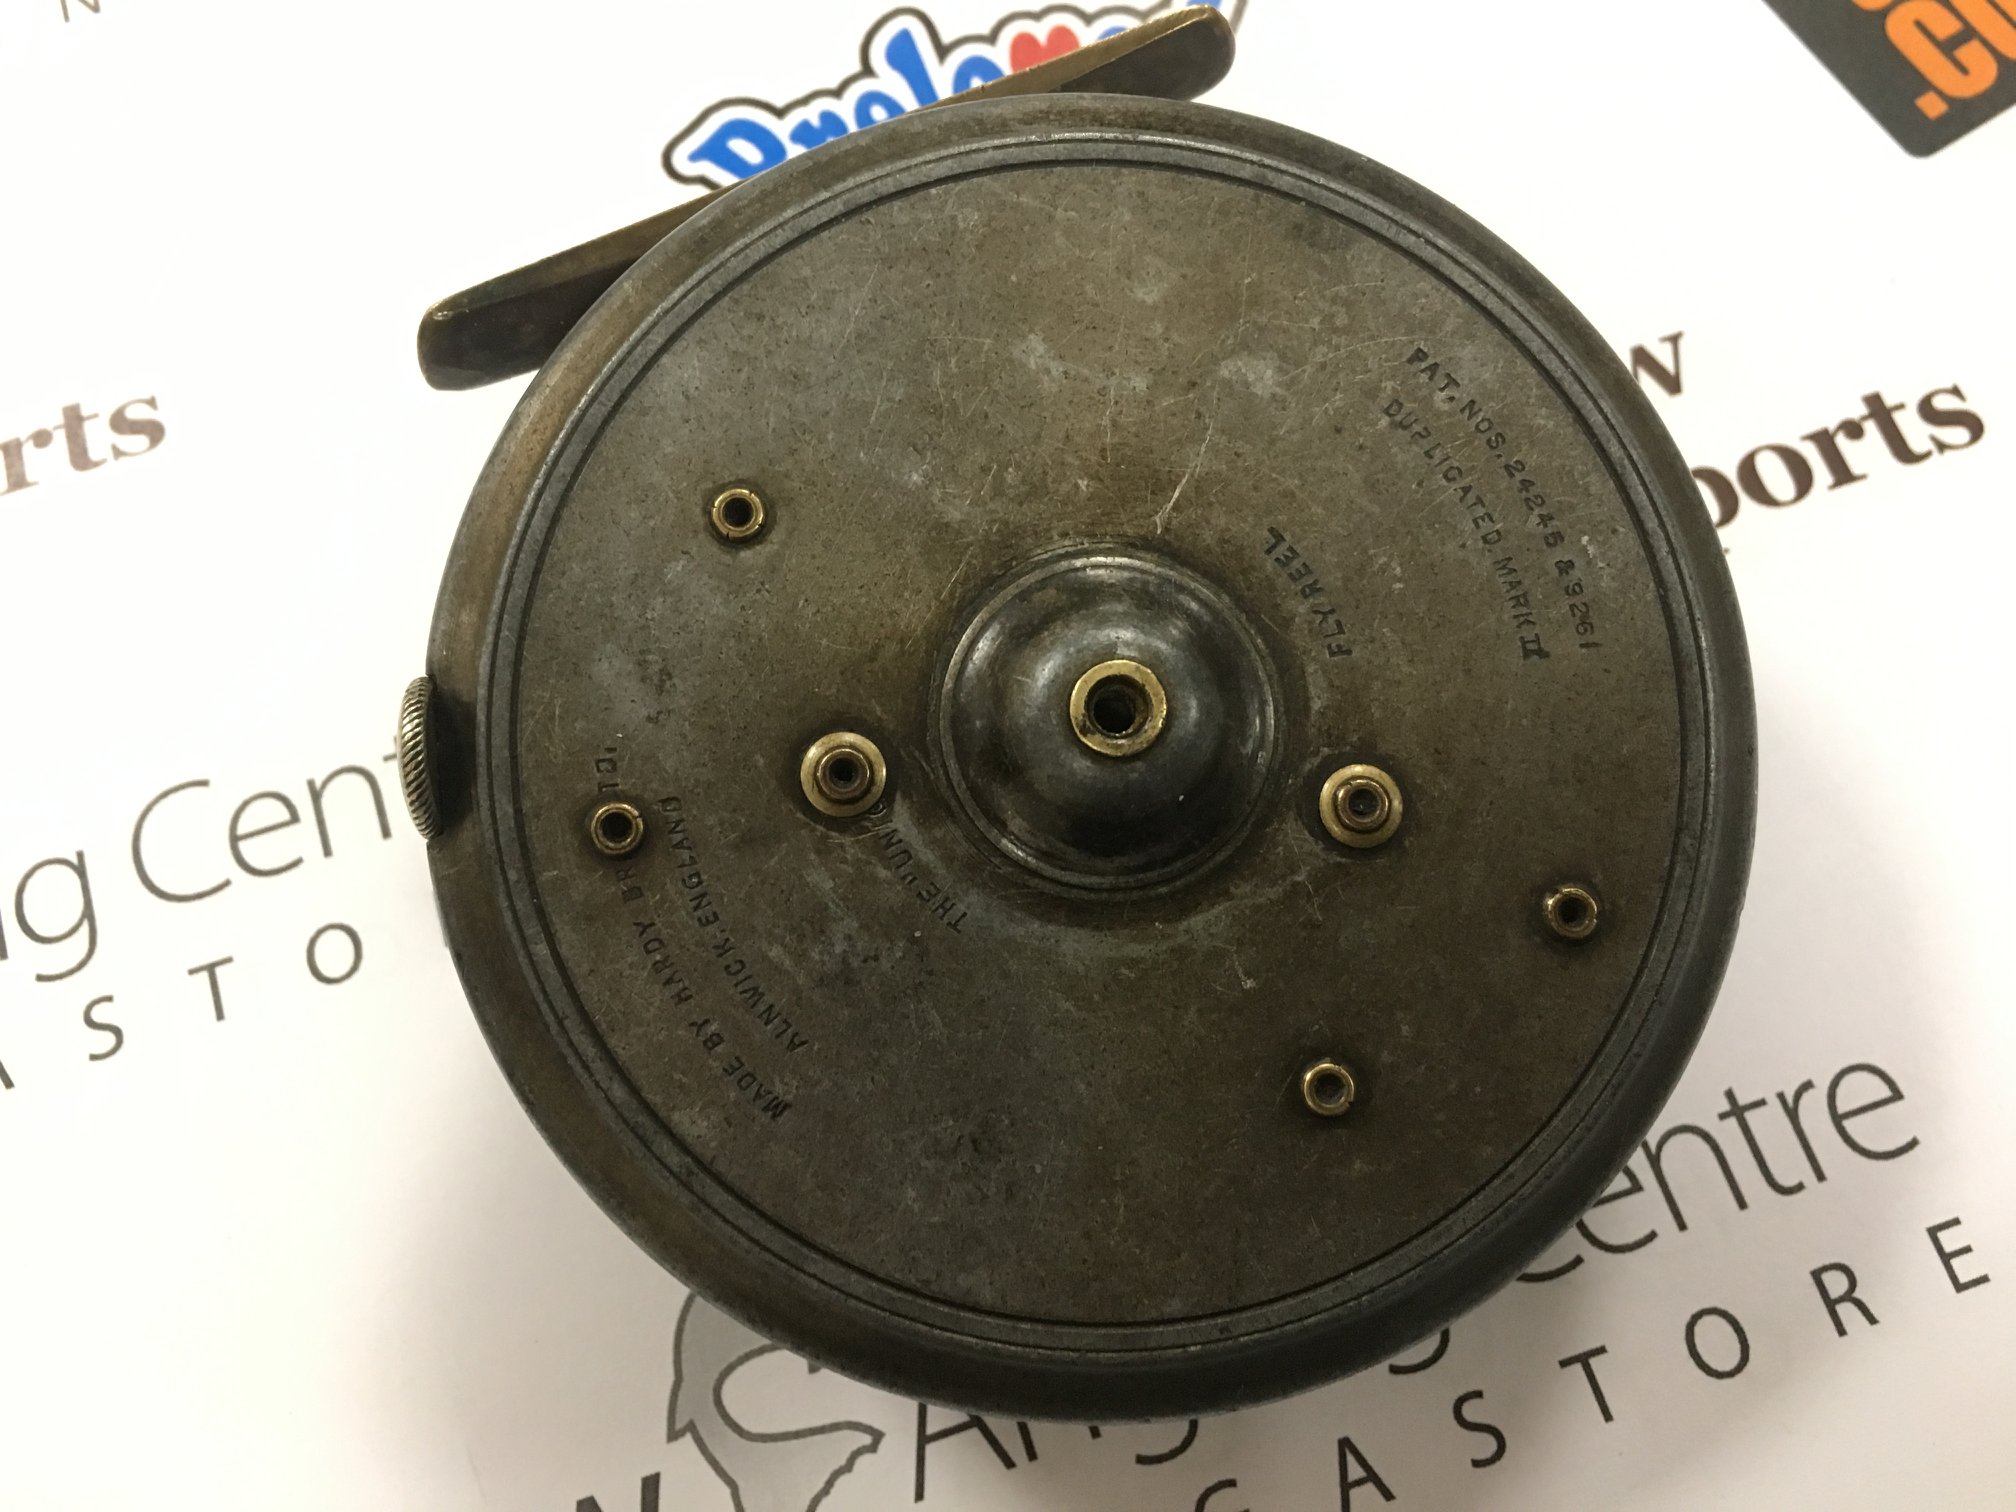 The 'Uniqua' Duplicated Mark II 3.5in Fly Reel - Used